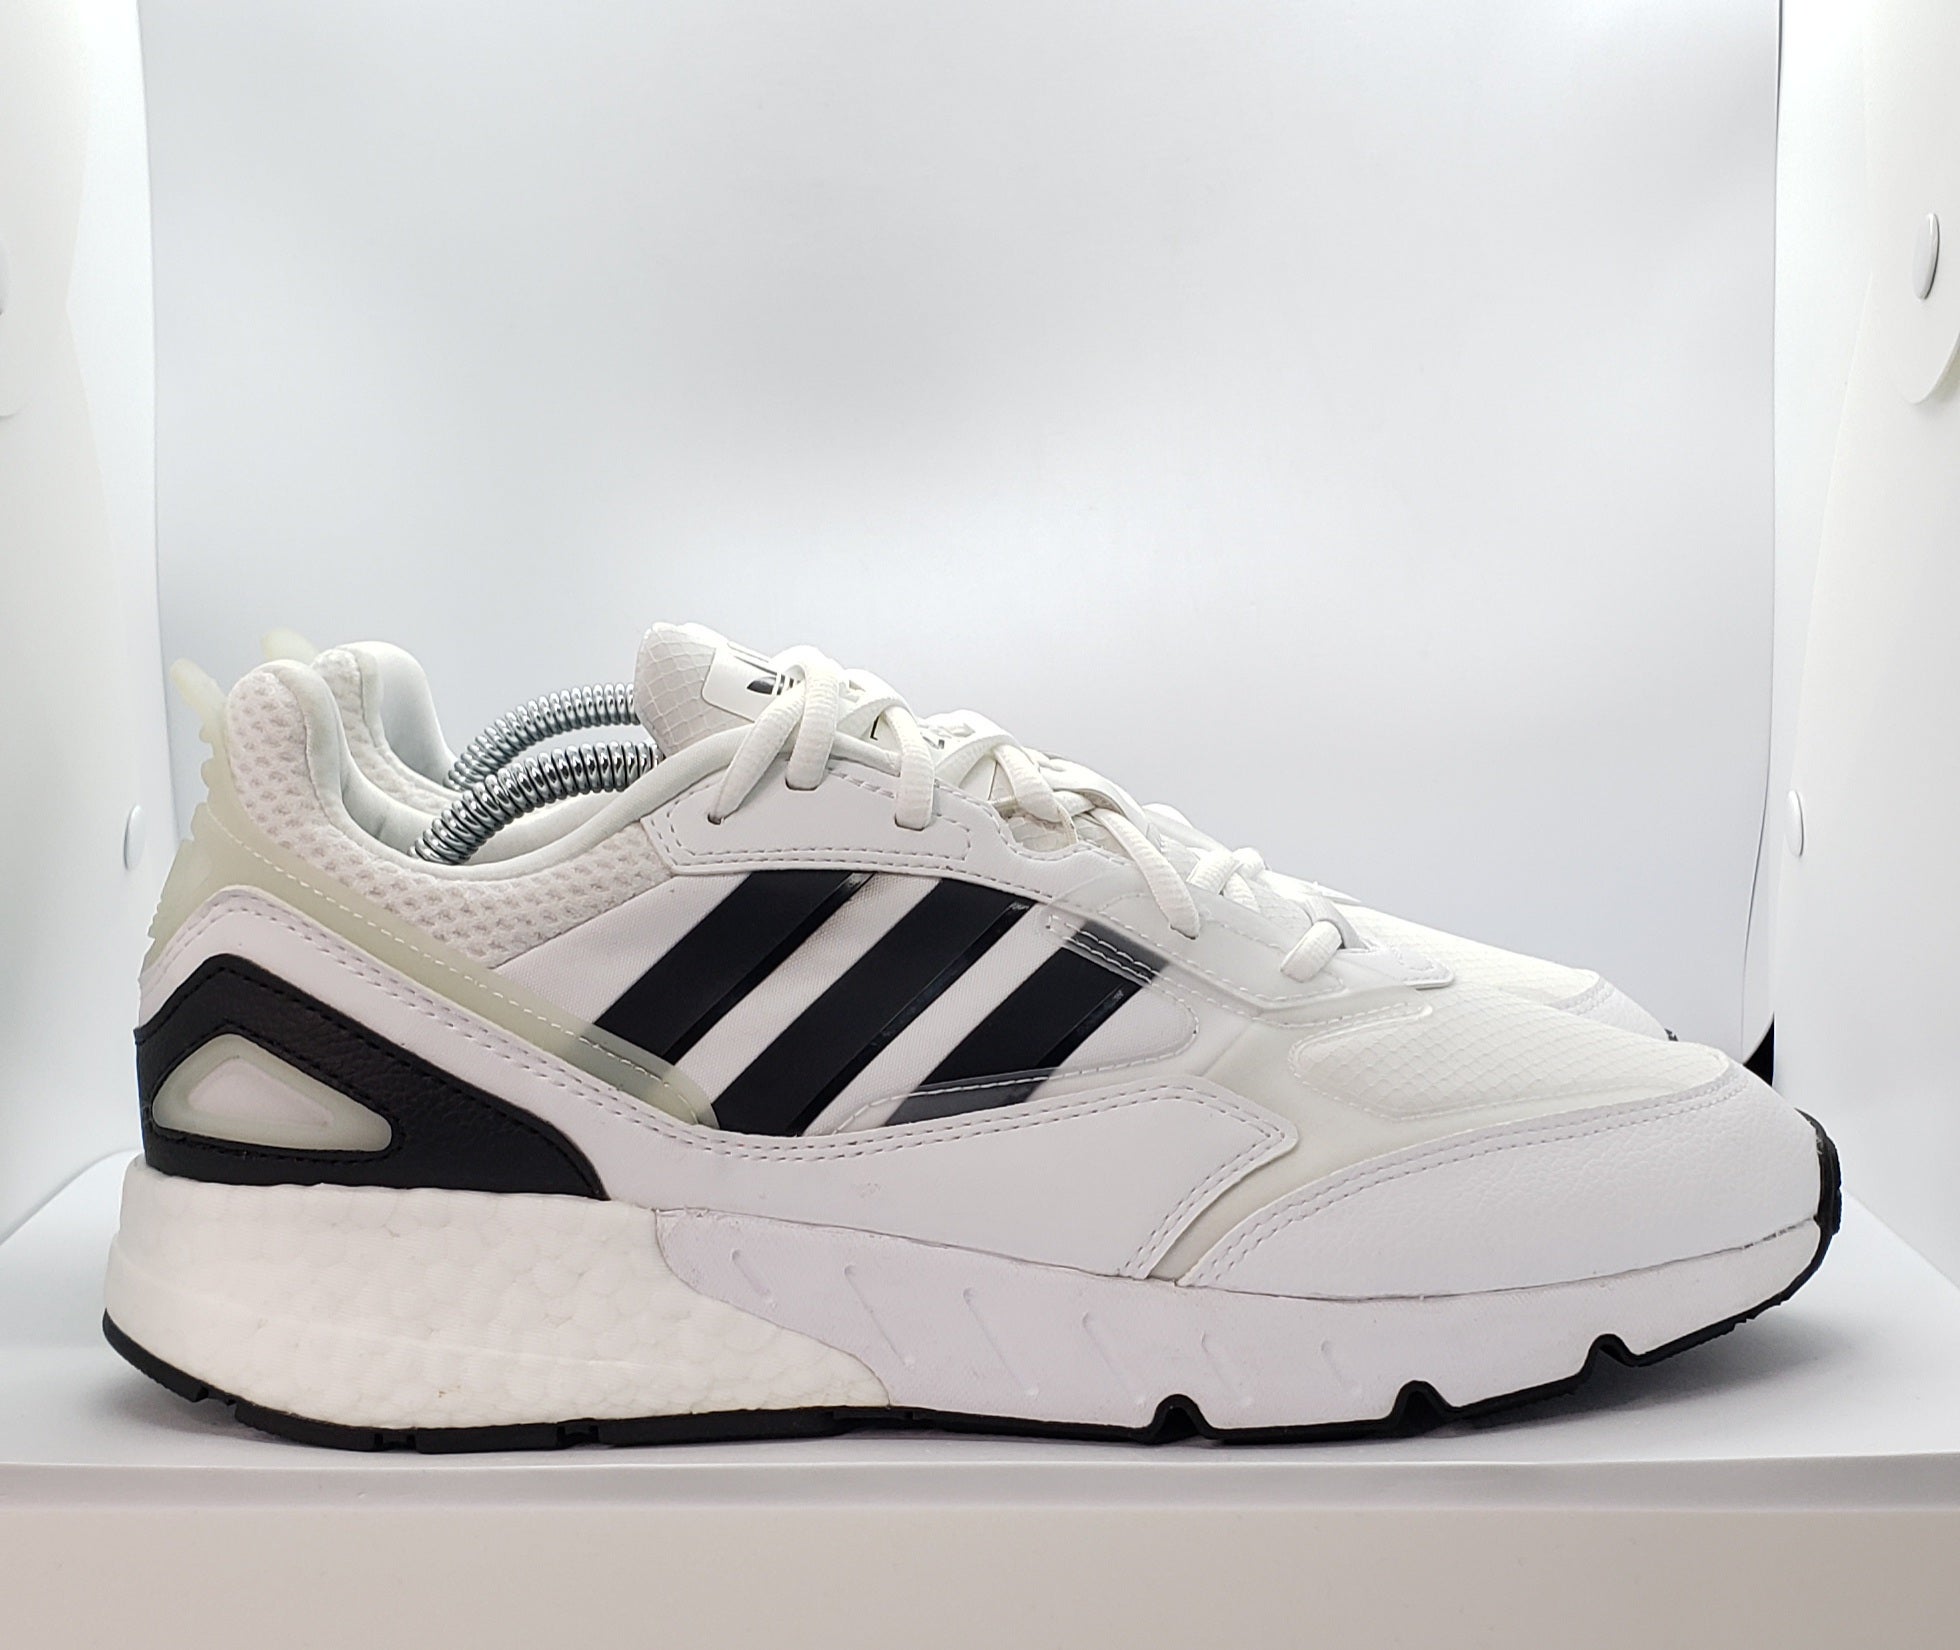 NEW Adidas ZX 1K Boost 2.0 Shoes Men's Size 11.5 White / Black 